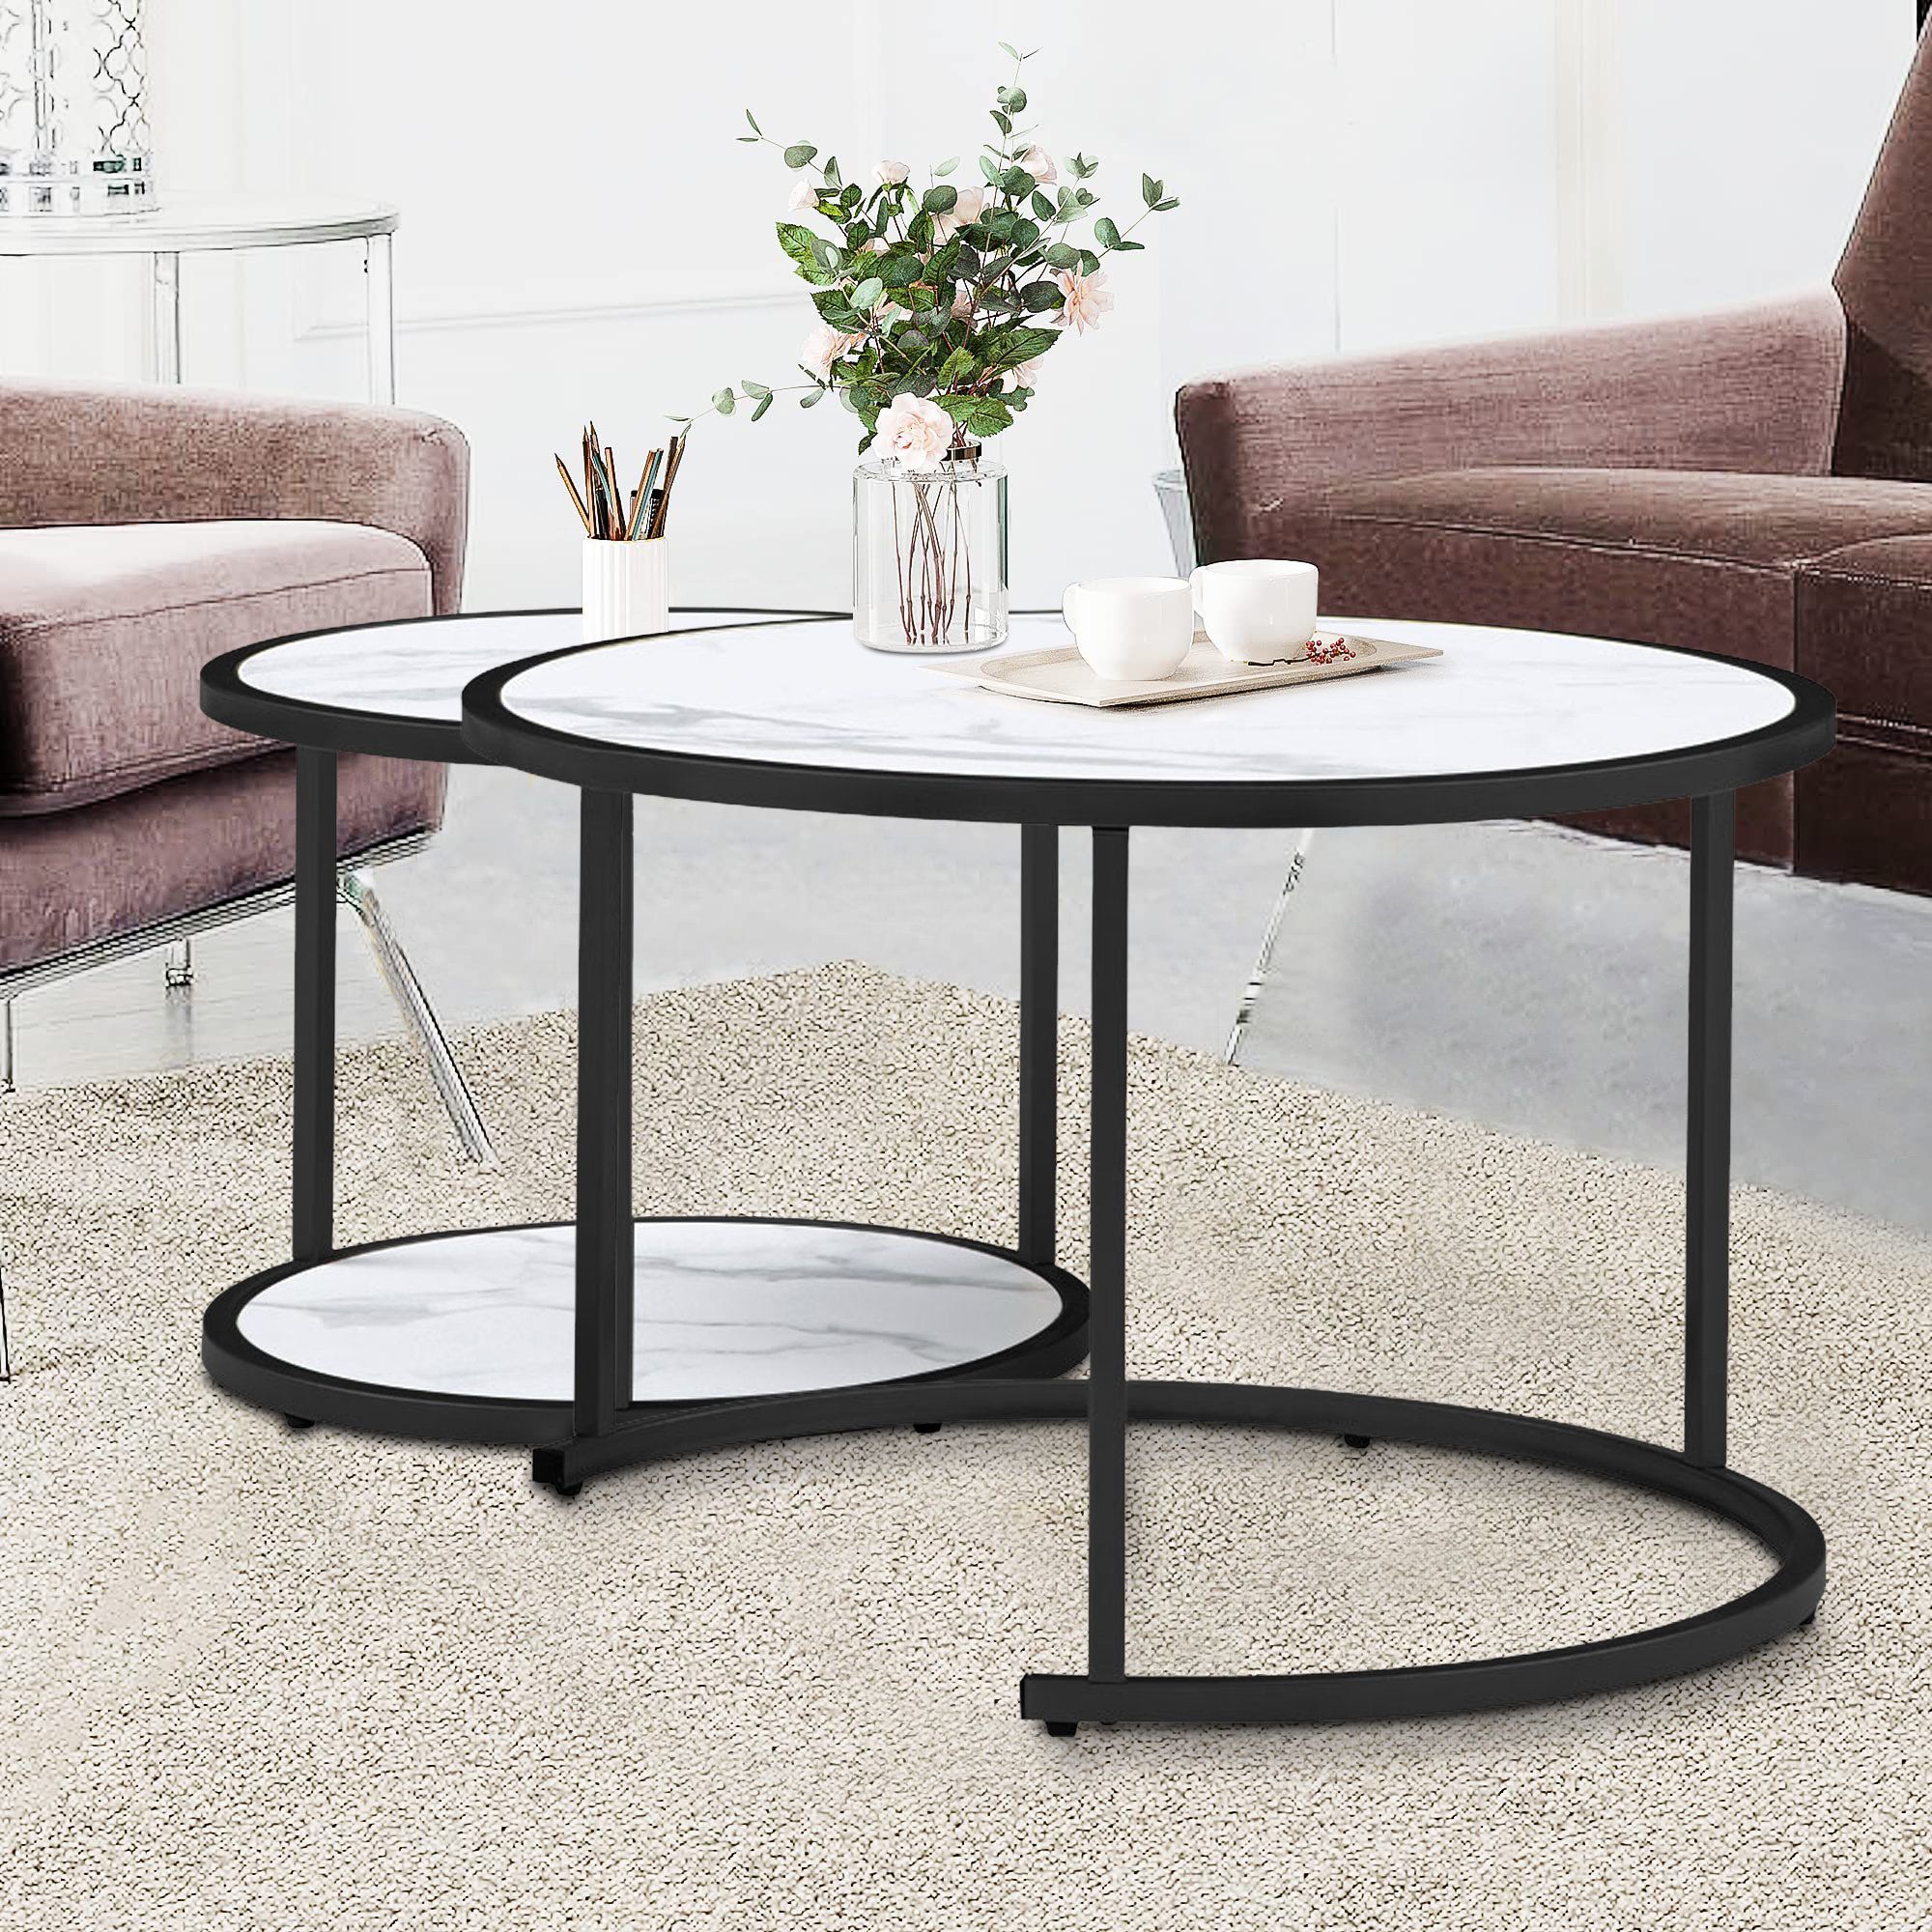 Everly Quinn 2 Pieces Modern Nesting Coffee Table, Round Wood Accent, Faux  Marble Mdf Top | Wayfair With Modern Round Faux Marble Coffee Tables (View 12 of 15)